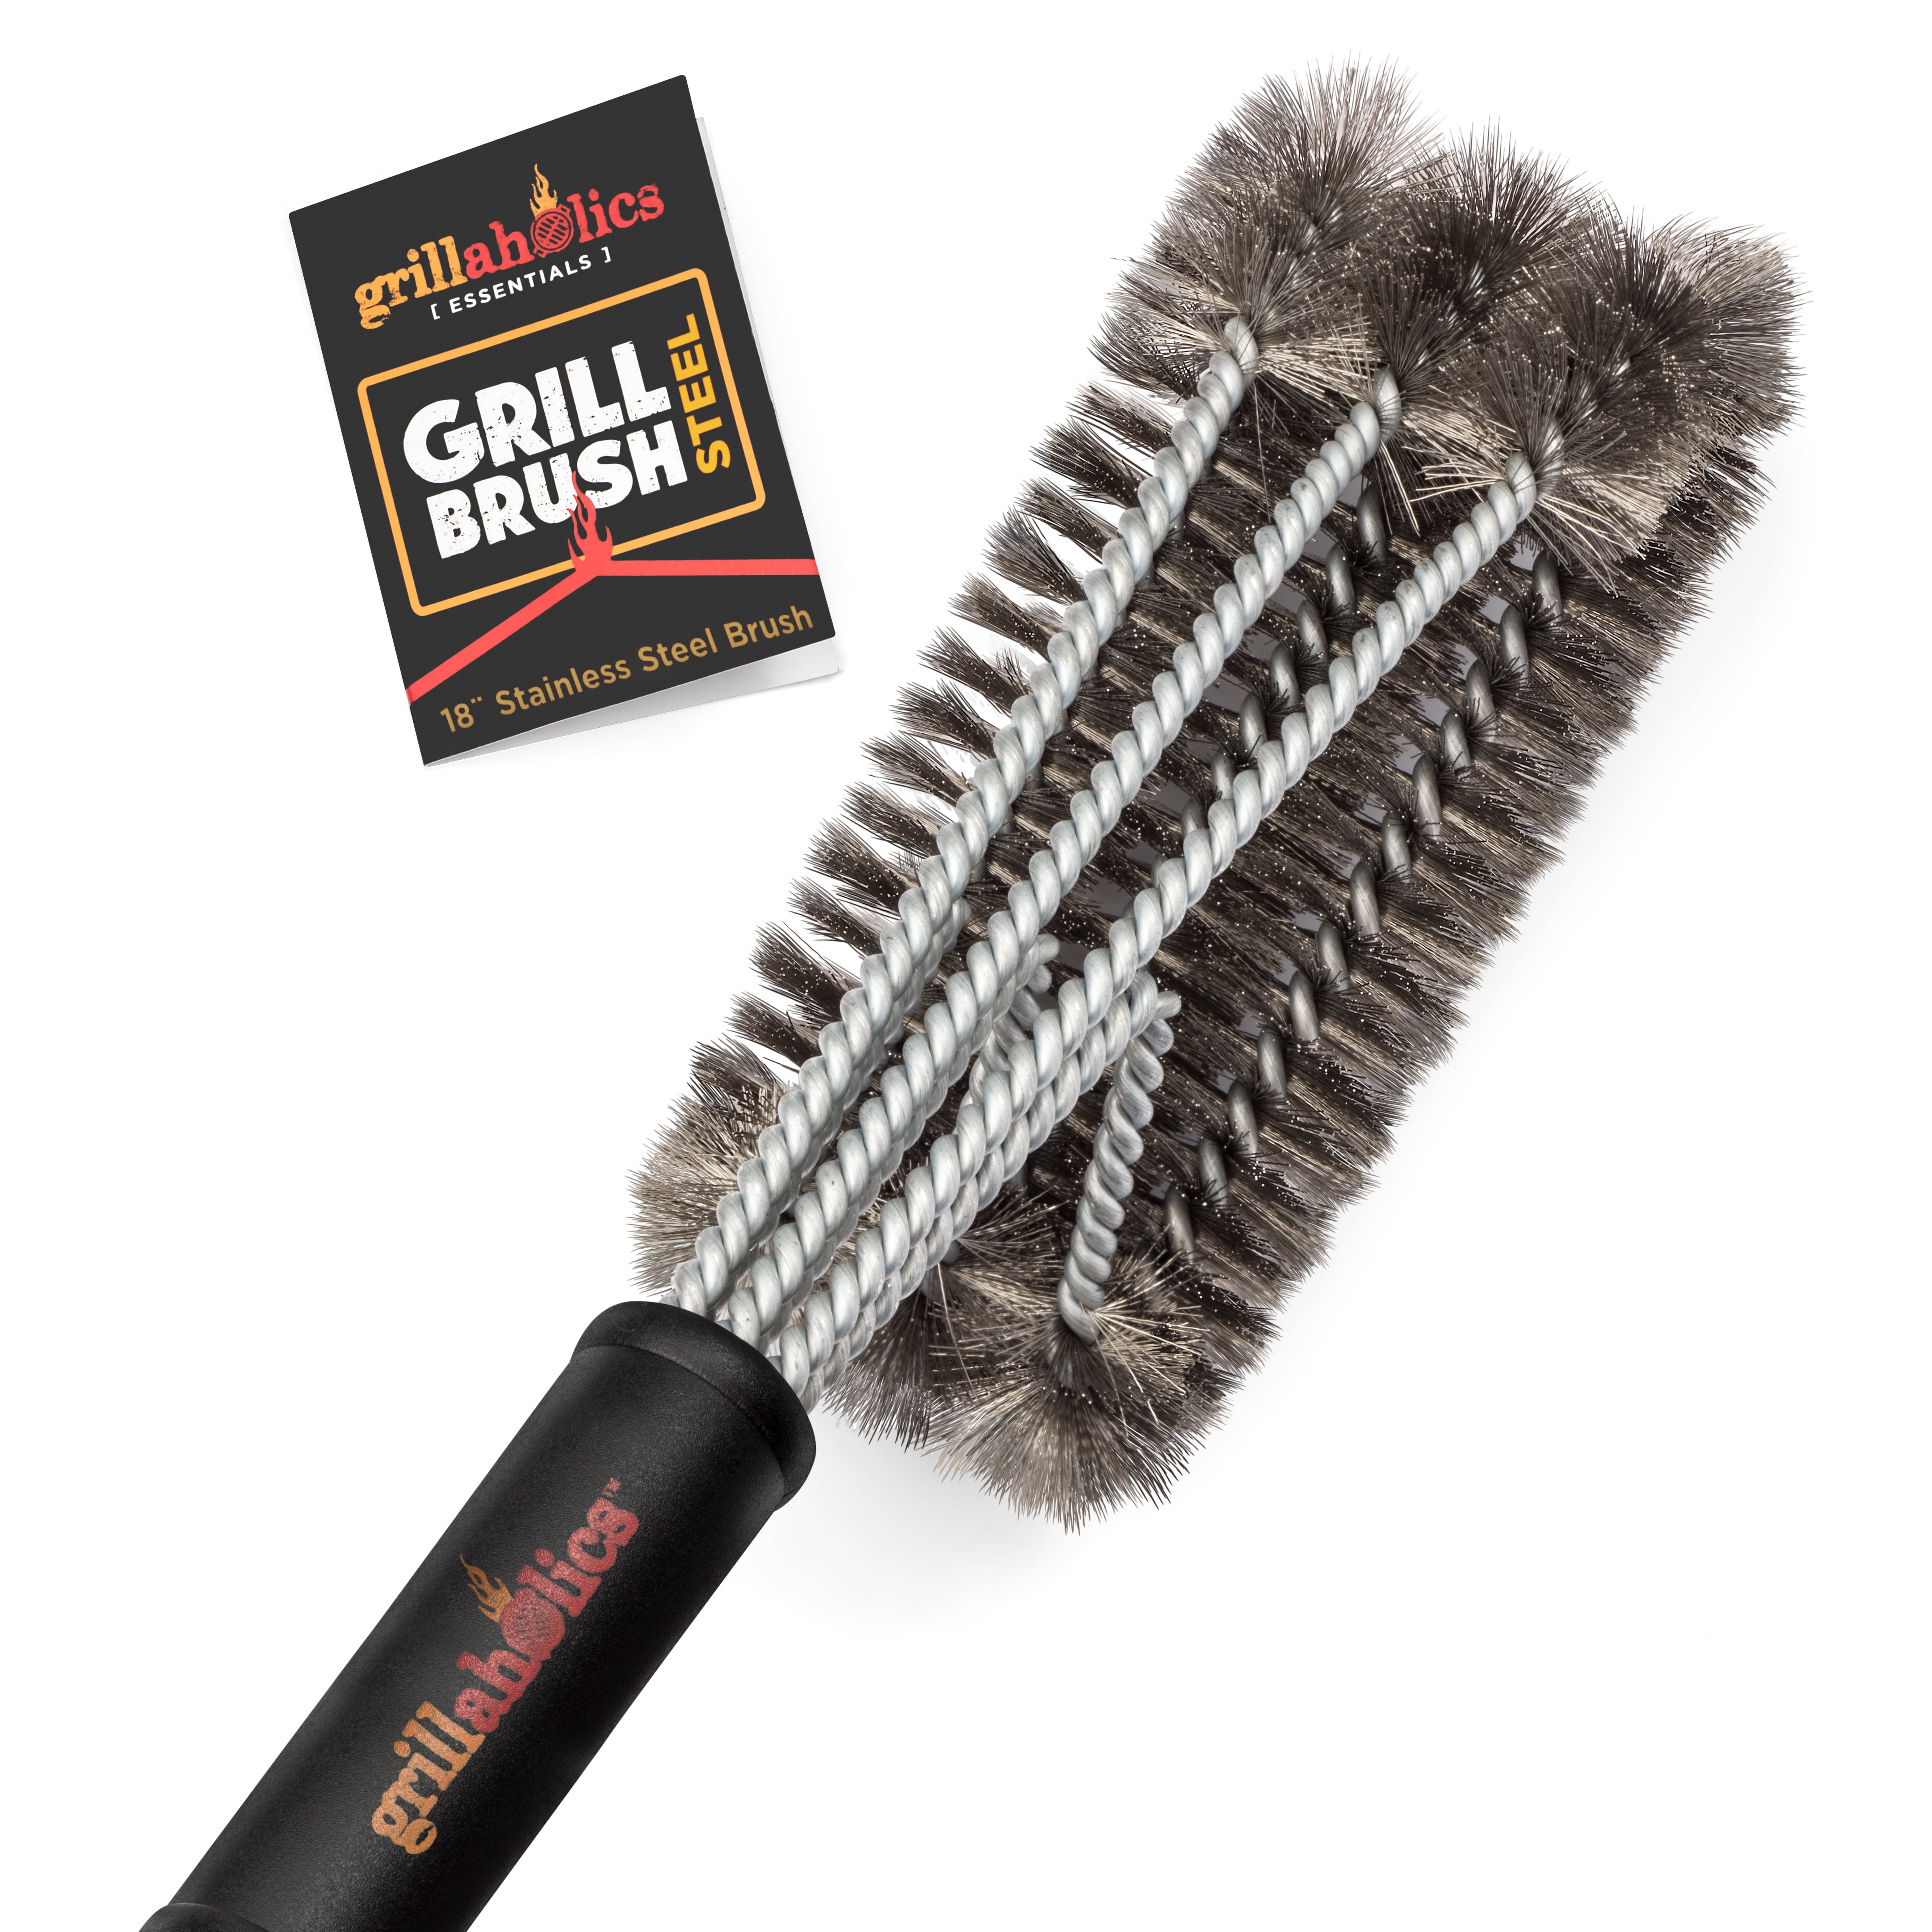 Wire Grill-Cleaning Brushes Can Pose Food Safety Hazard